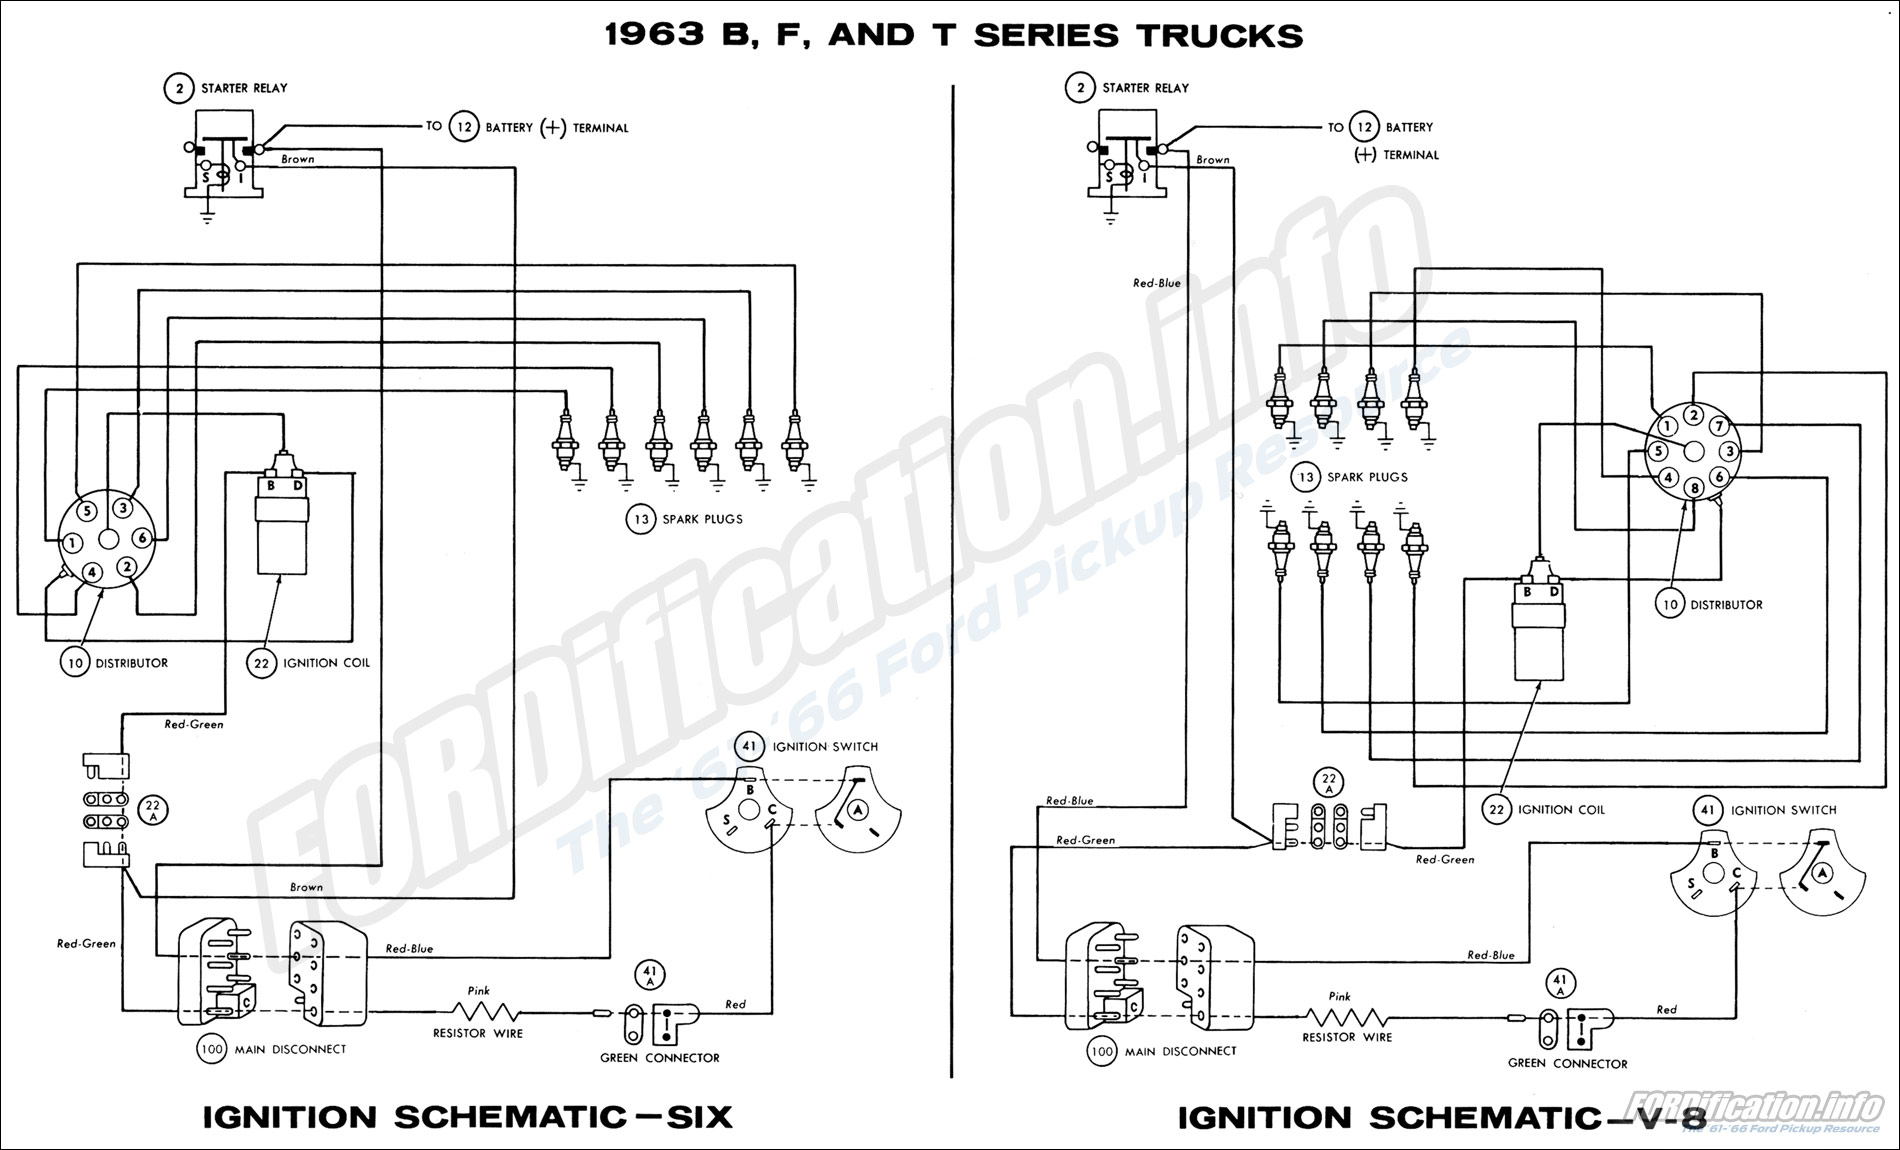 1963 Ford Truck Wiring Diagrams - FORDification.info - The ... 63 ford ranchero ignition diagram 